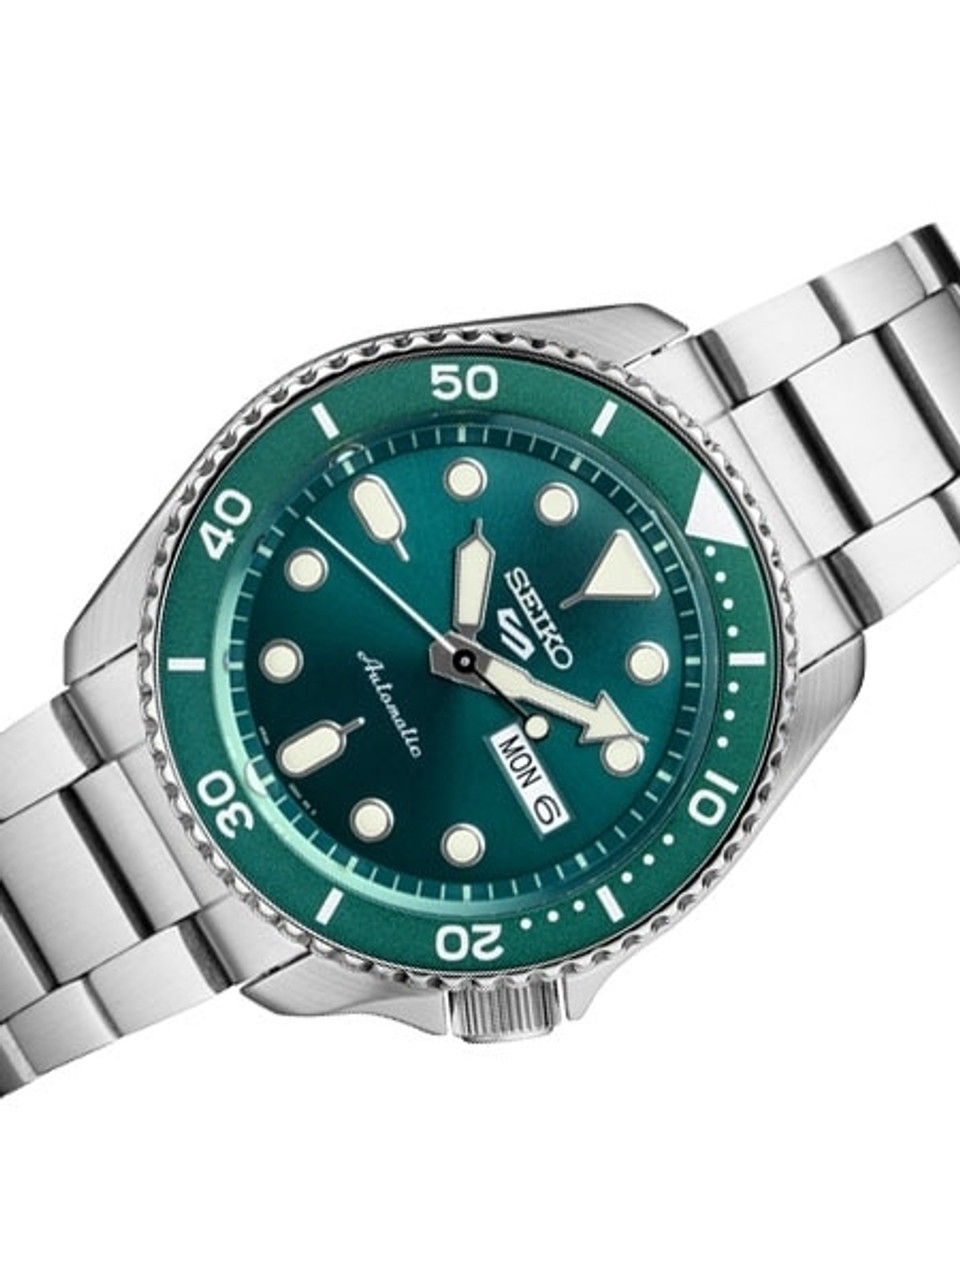 Seiko 5 Sports Automatic 24-Jewel Watch with Green Dial #SRPD61